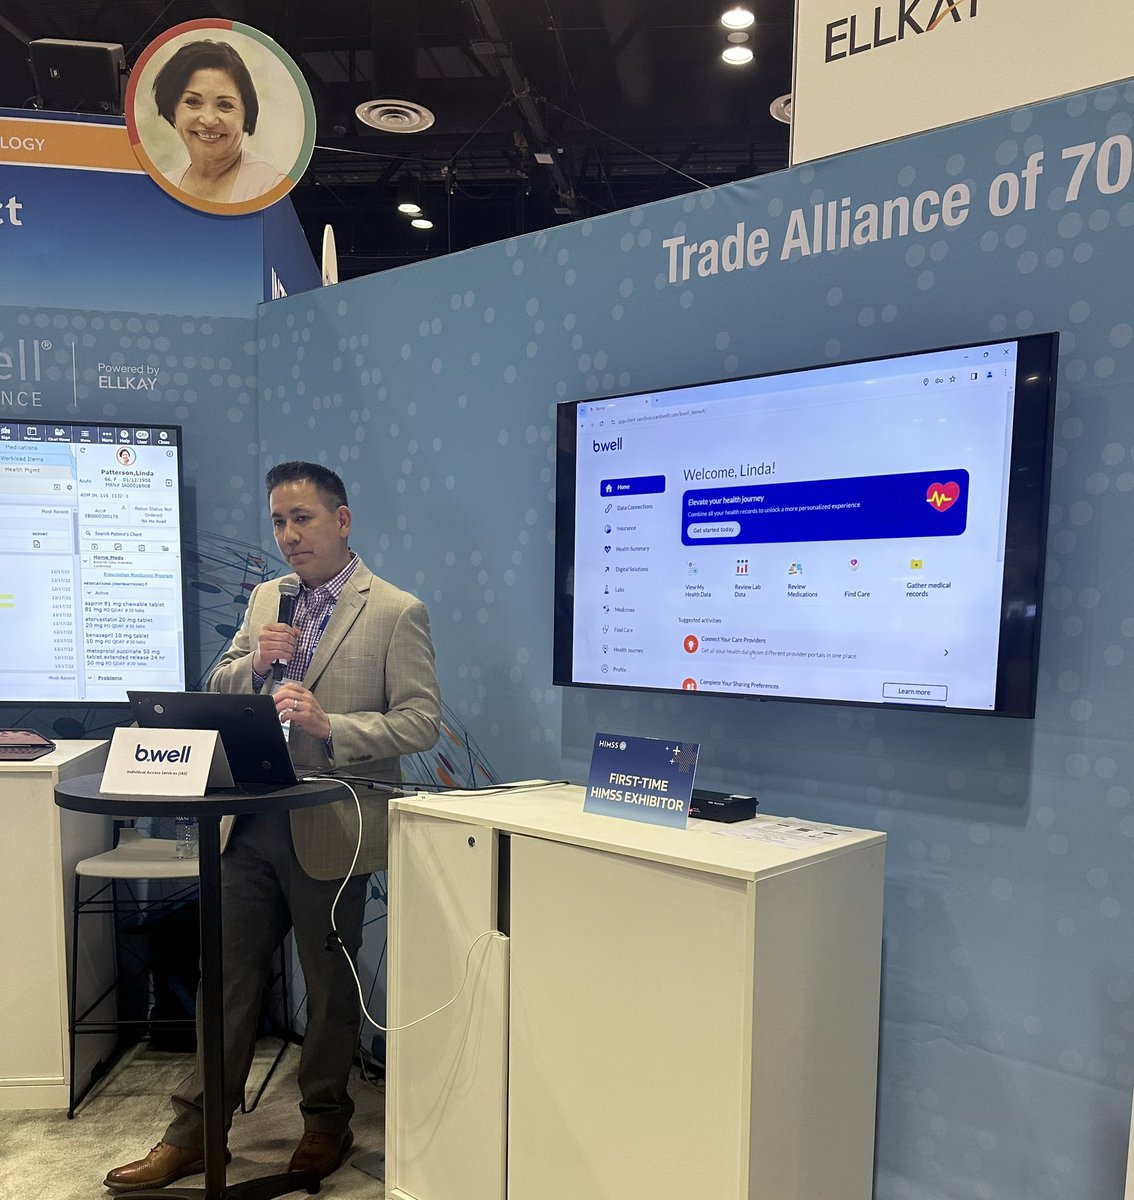 📣 Patients MUST be able to access their own health data. Period. Full stop. They must be able to do this easily and without remembering their old portal logins. @CommonWell member @icanbwell makes that possible. #patientaccess #IAS #TEFCA #HIMSS24